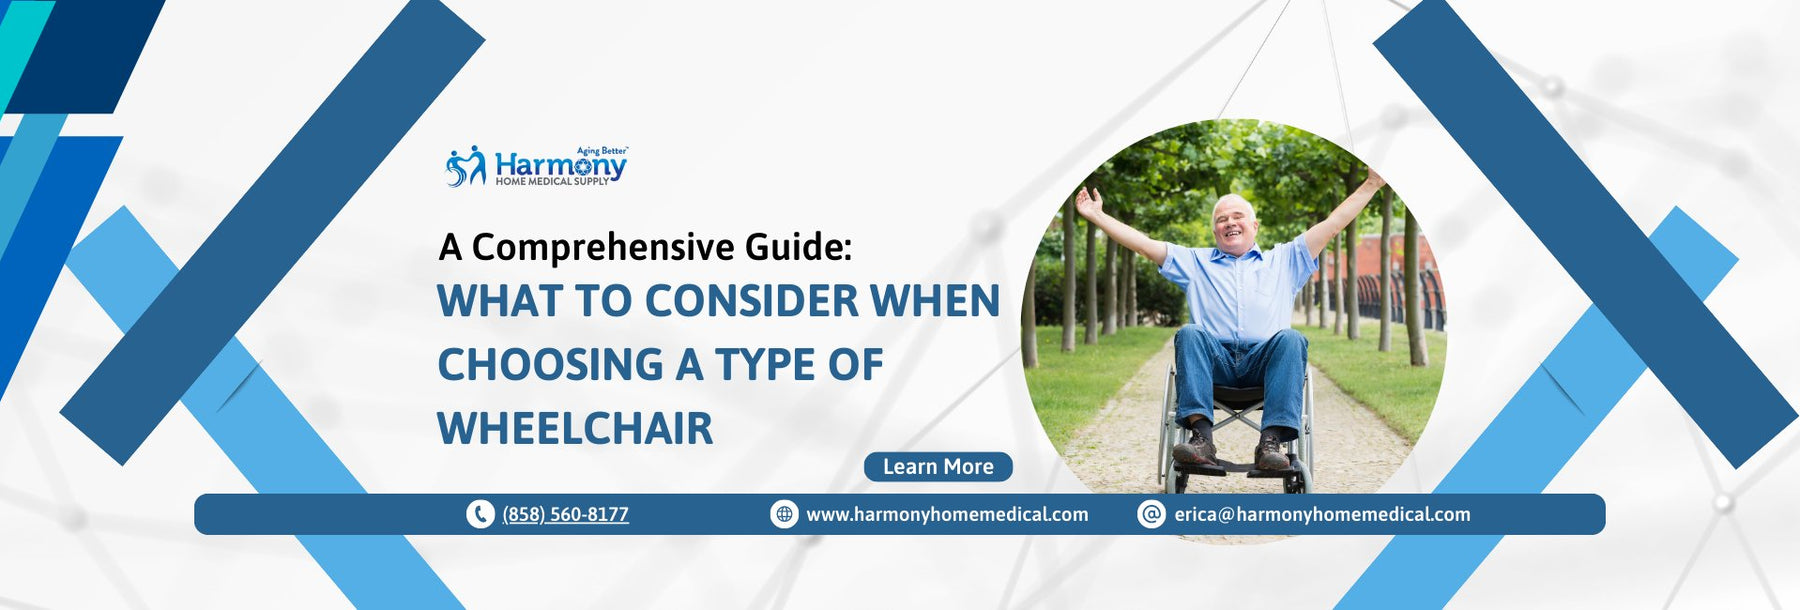 A Comprehensive Guide:  What to Consider When Choosing a Type of Wheelchair - Harmony Home Medical Supply